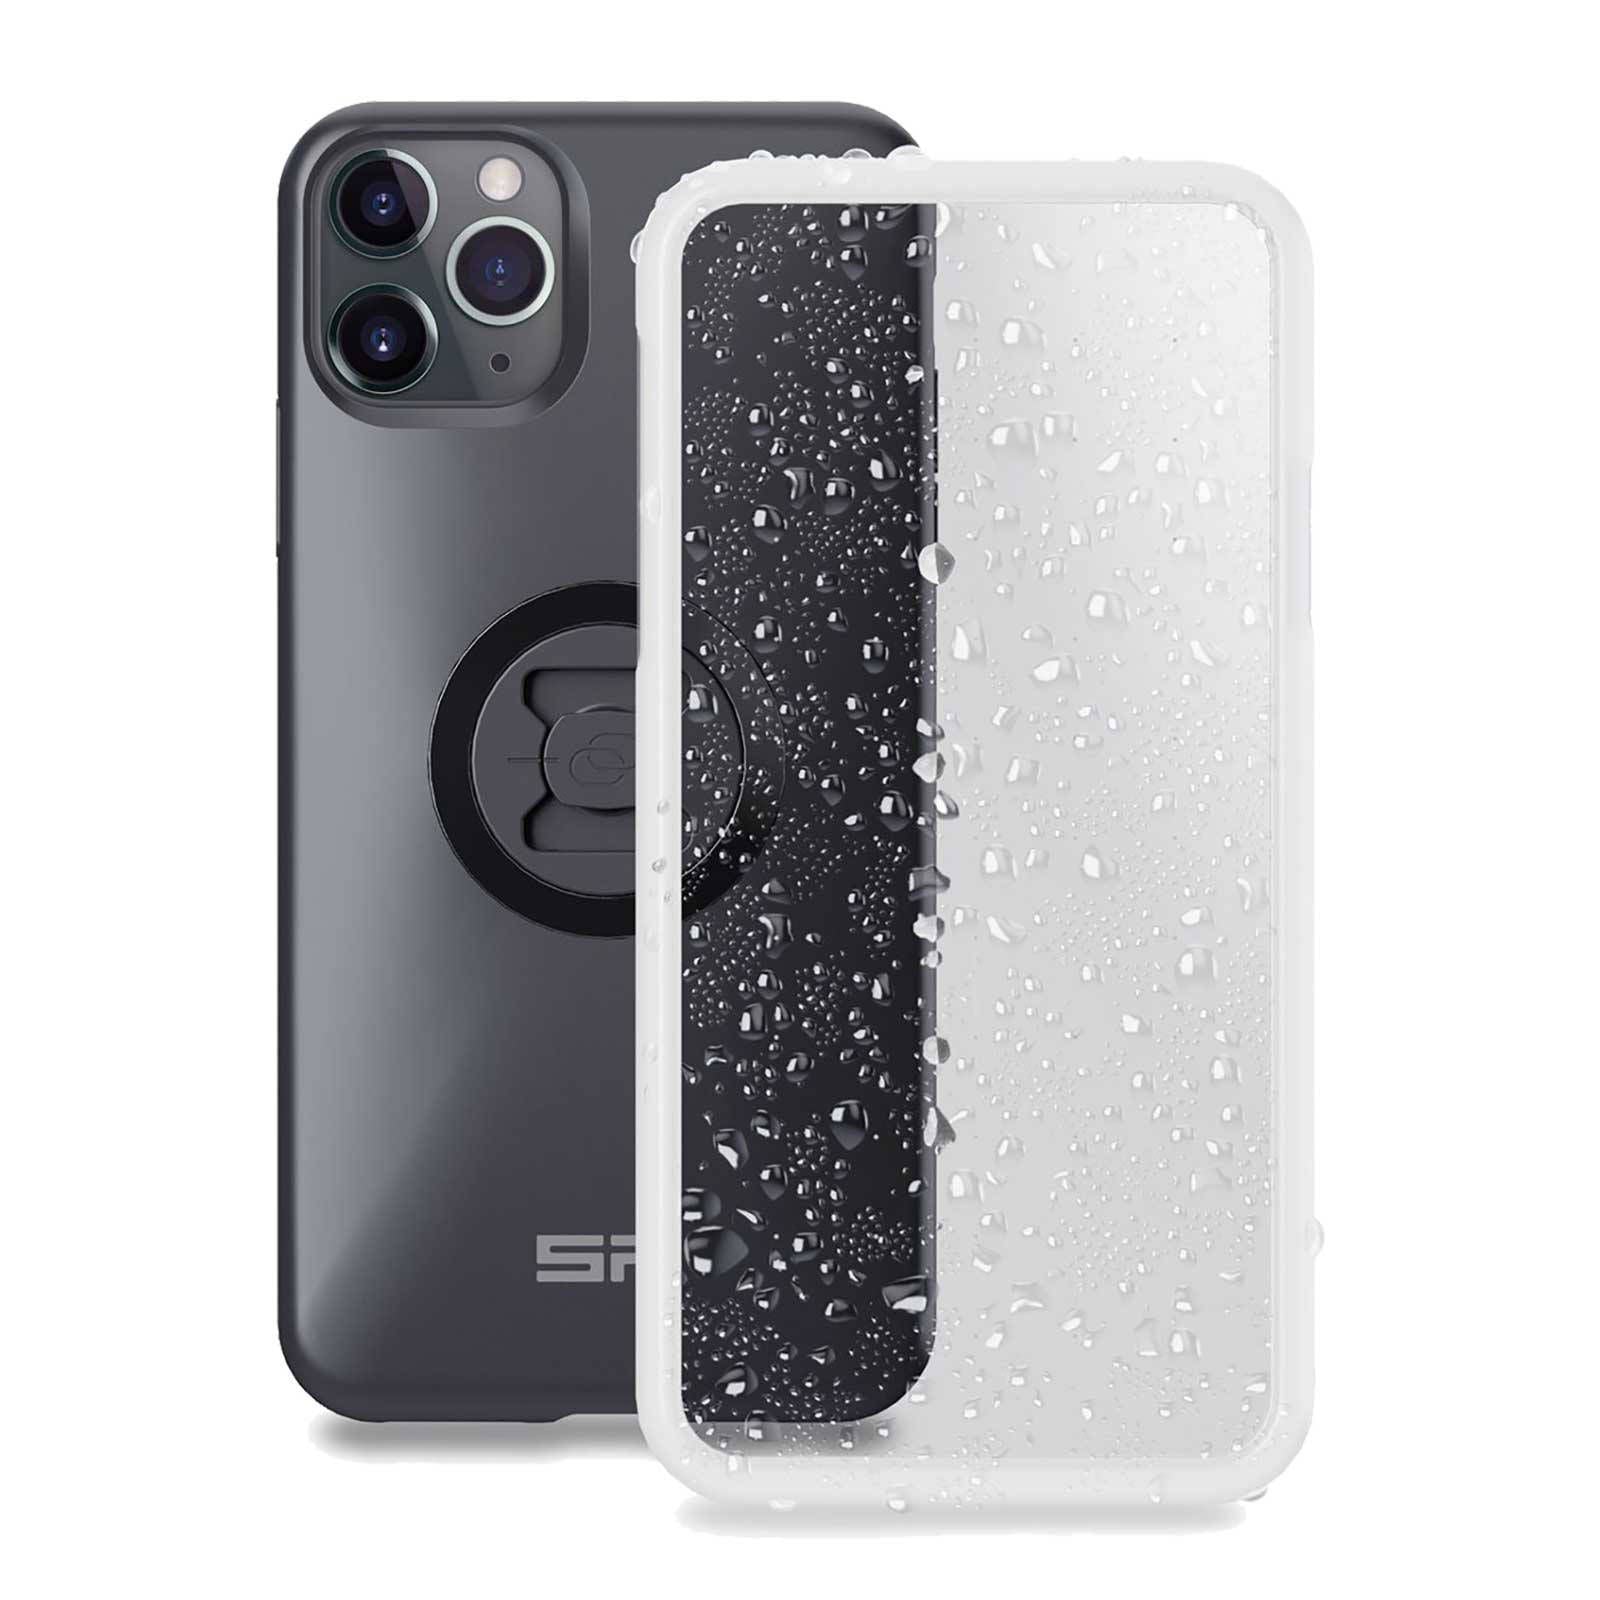 New SP CONNECT WEATHER COVER APPLE IPHONE 11 PRO MAX SPC53223